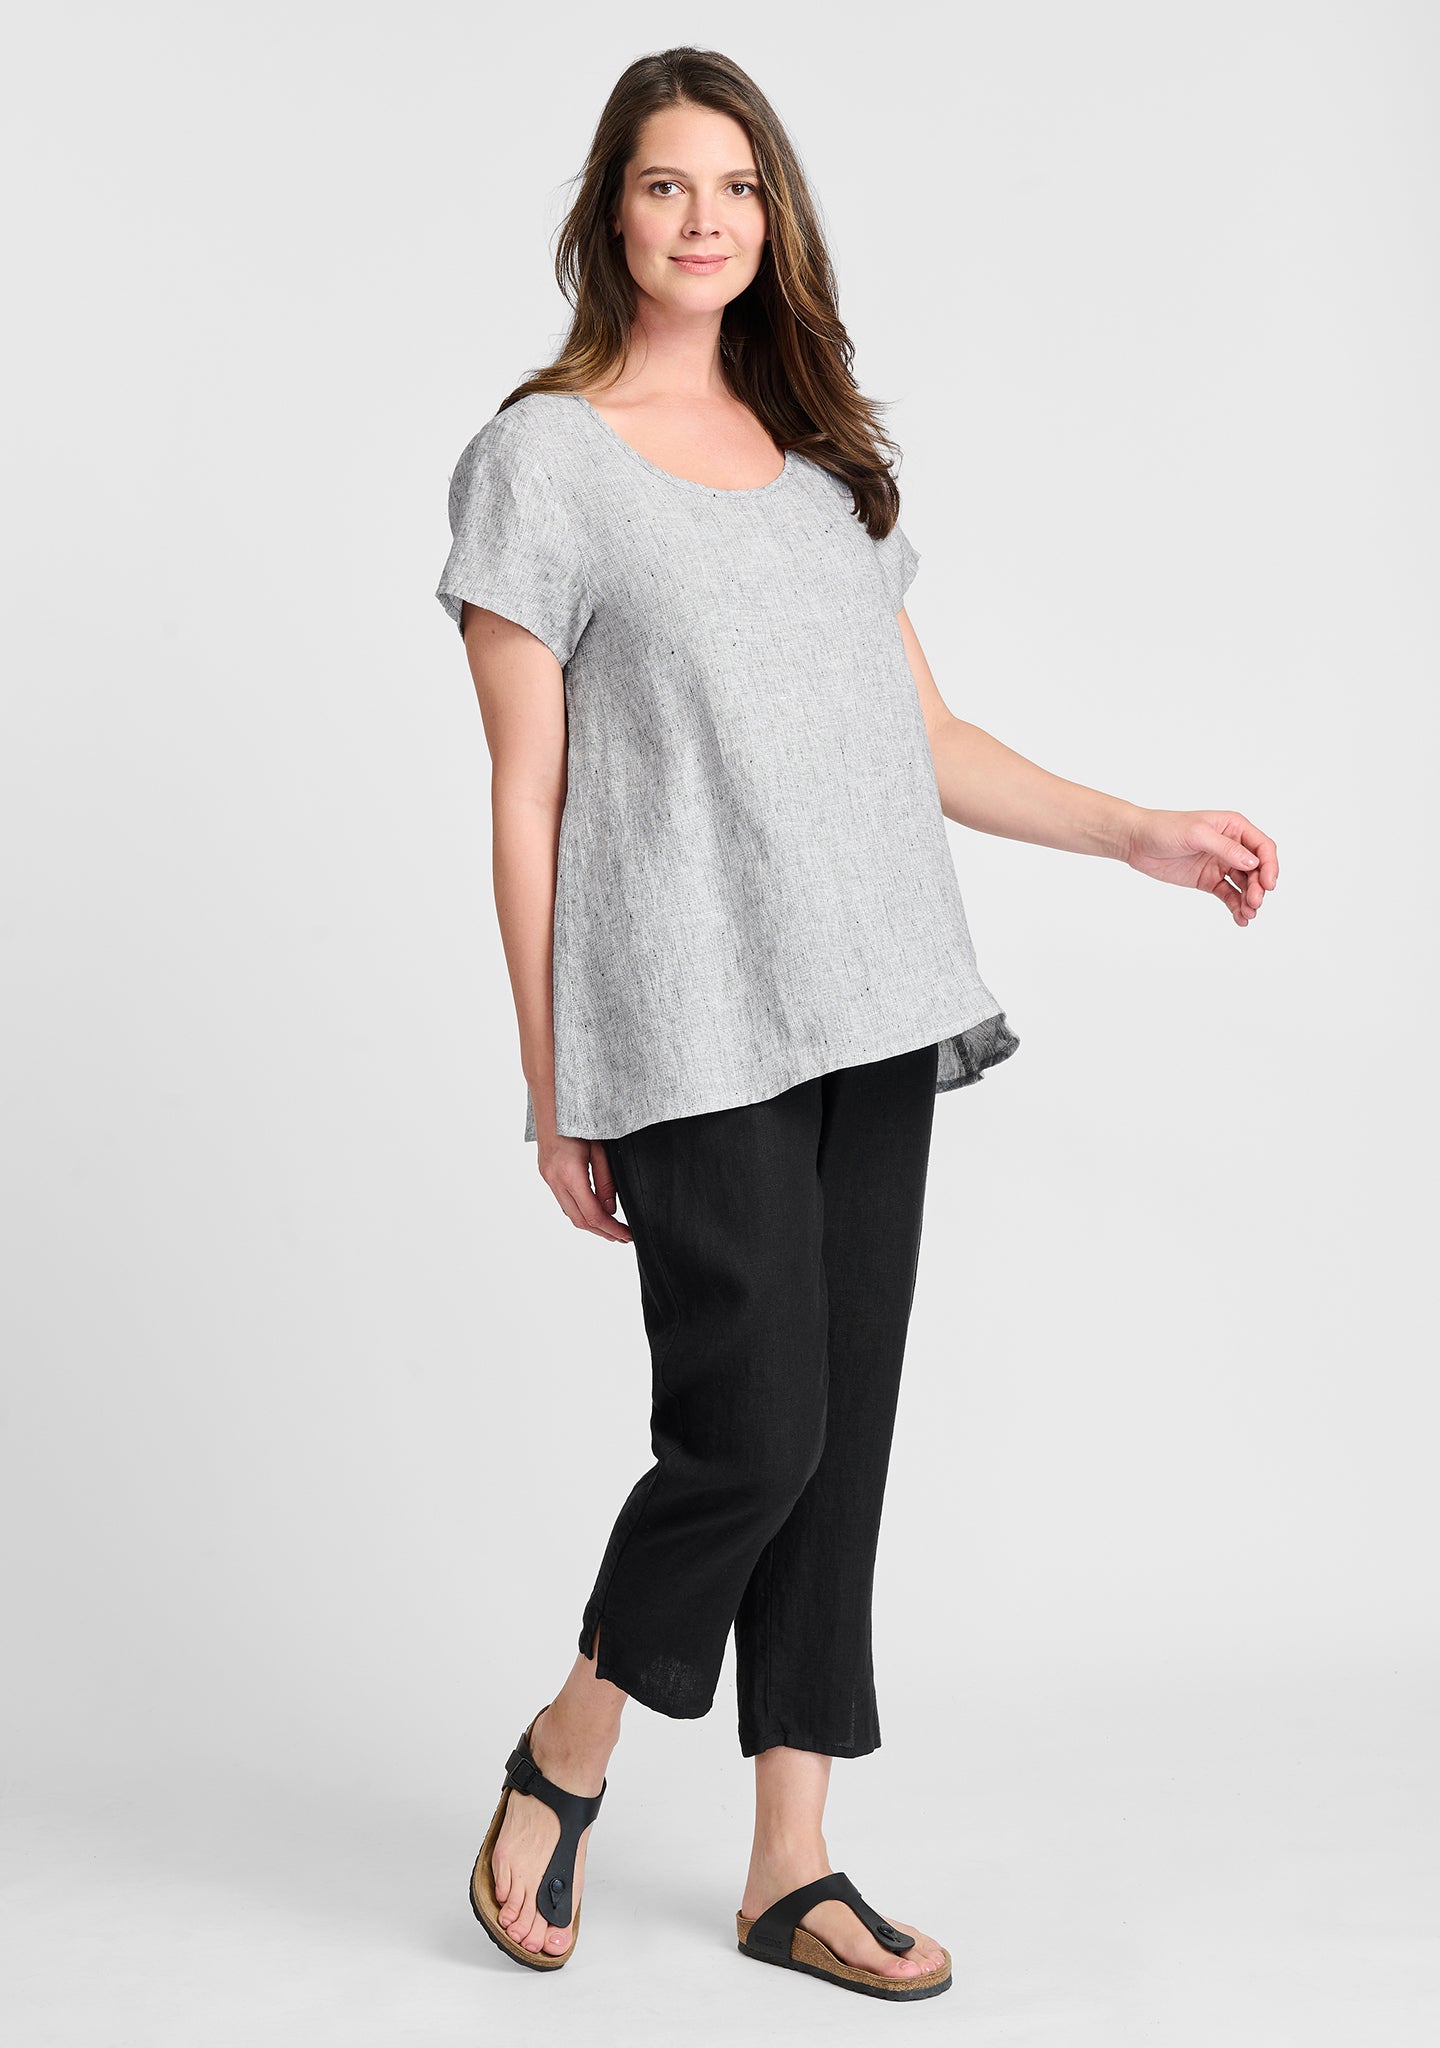 FLAX linen shirt in grey with linen pants in black